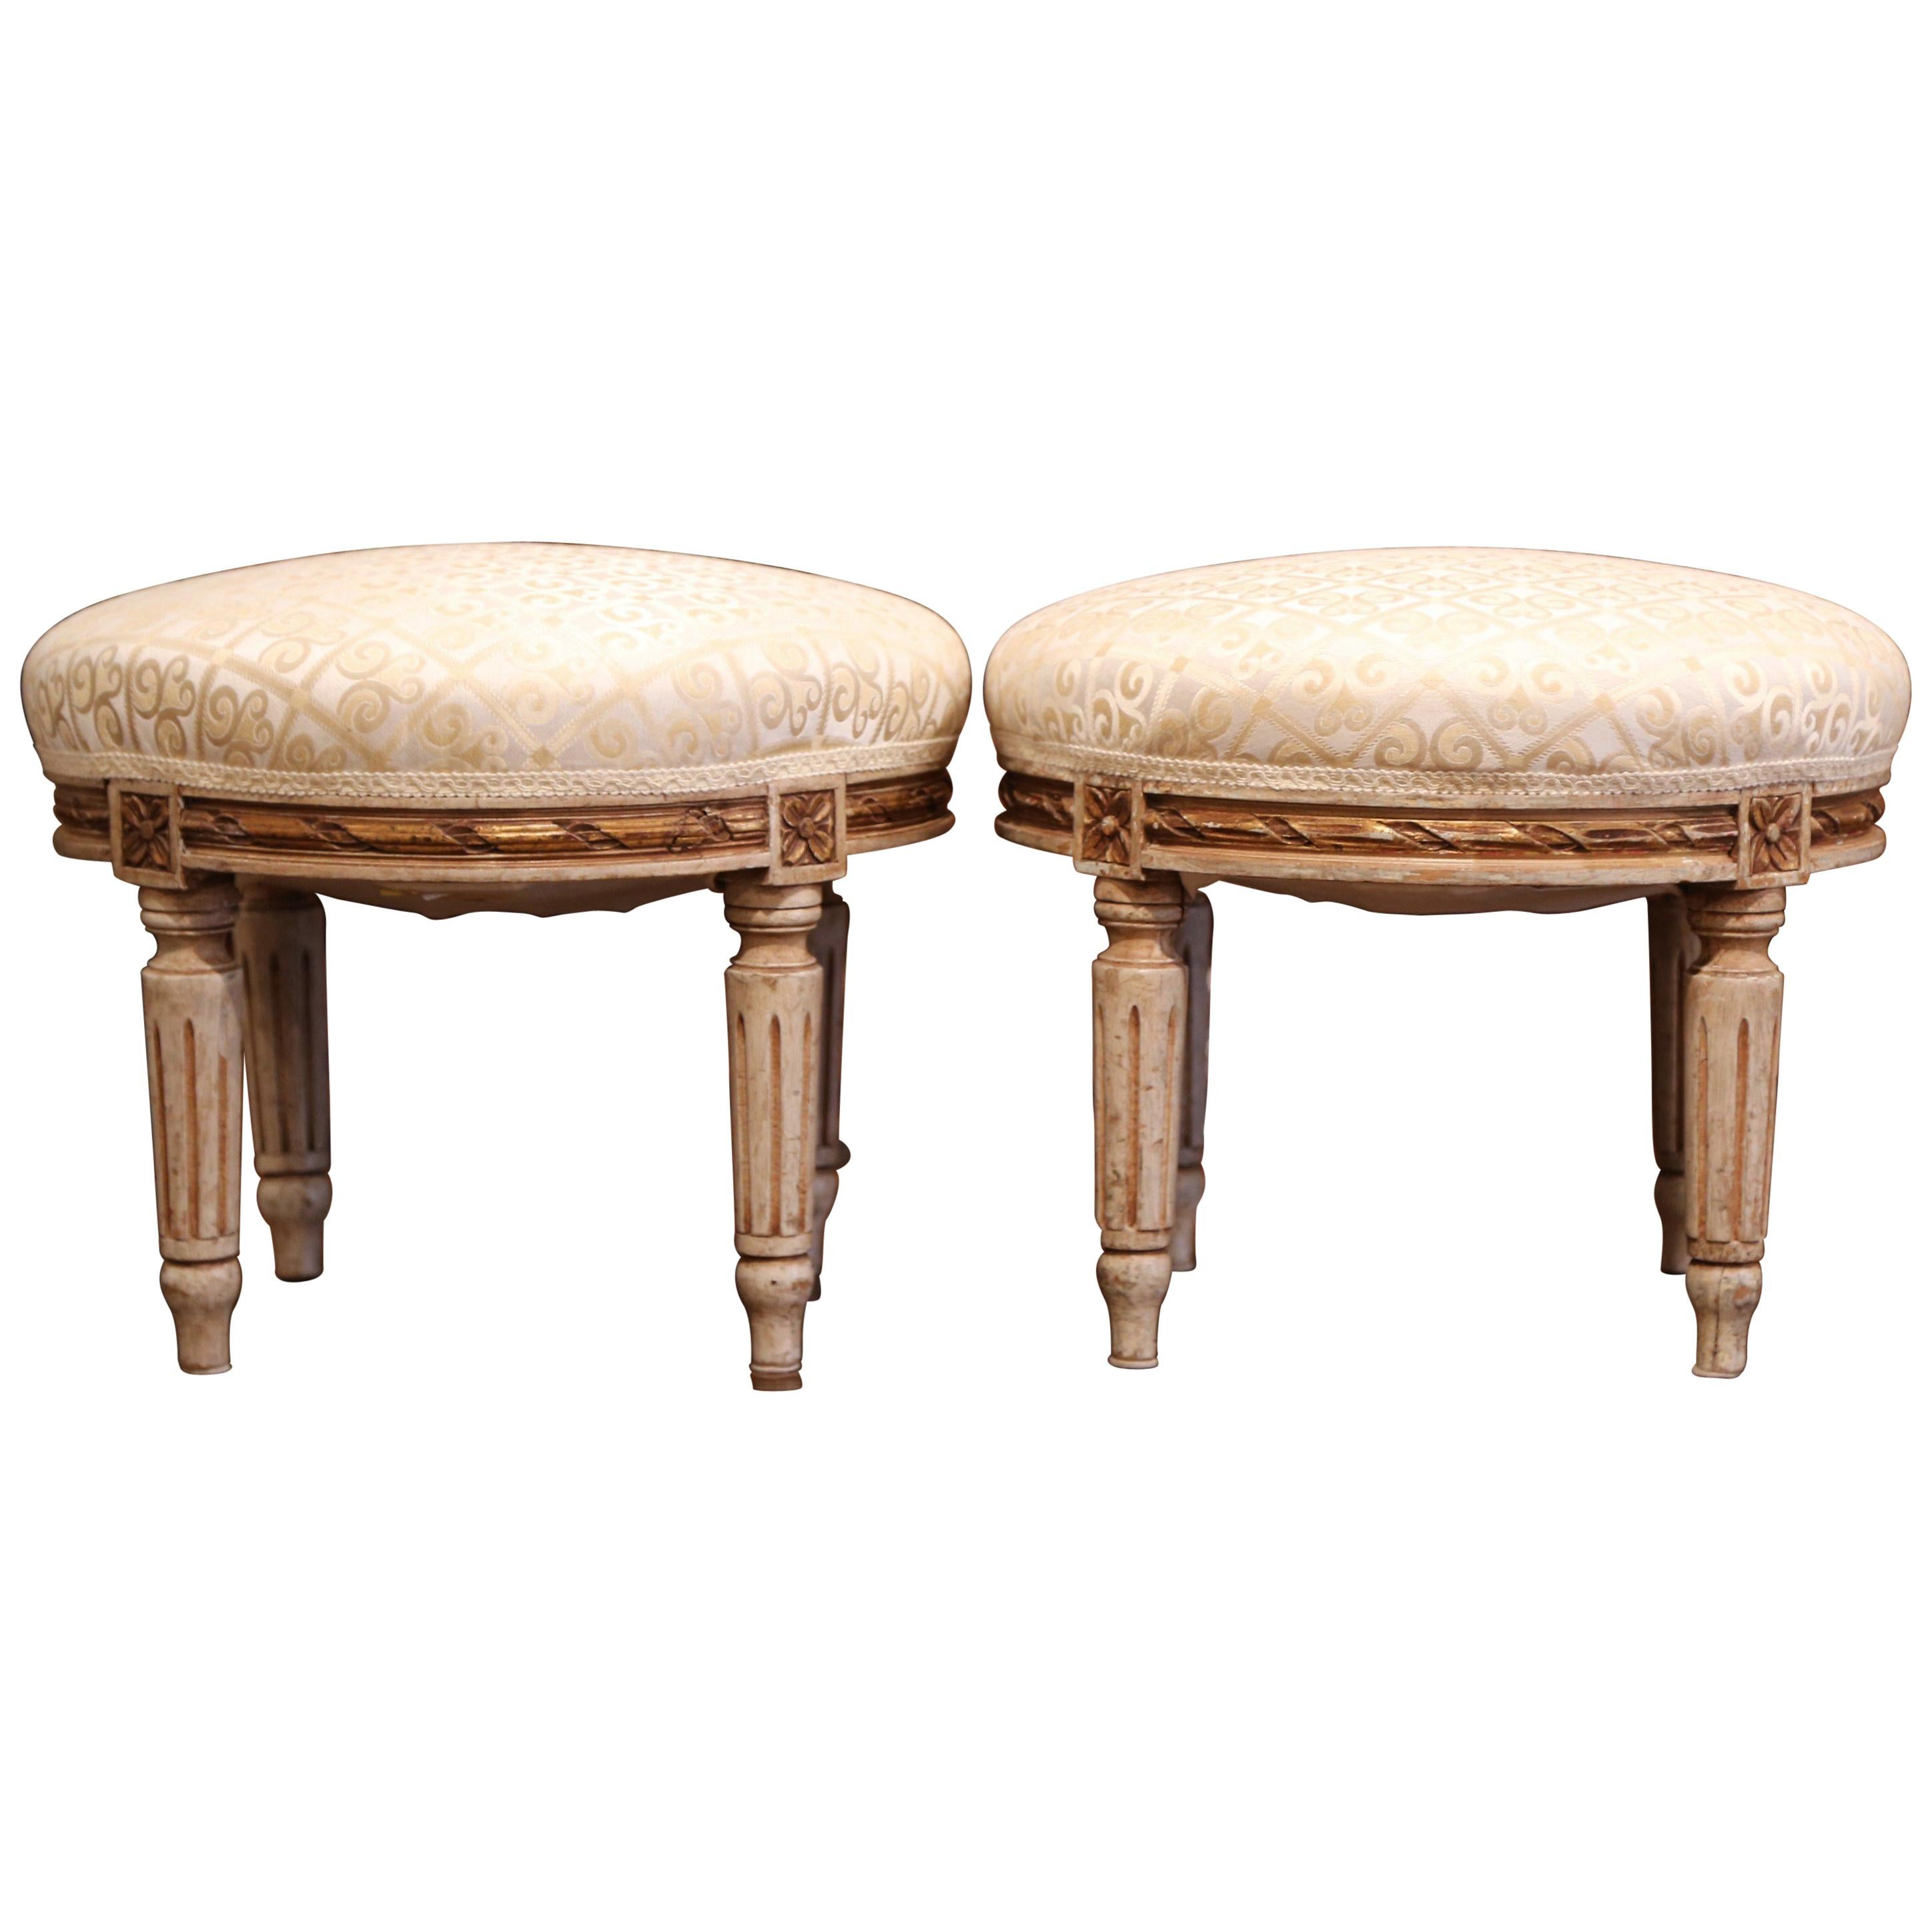 Pair of Early 20th Century French Louis XVI Carved Painted and Gilt Footstools